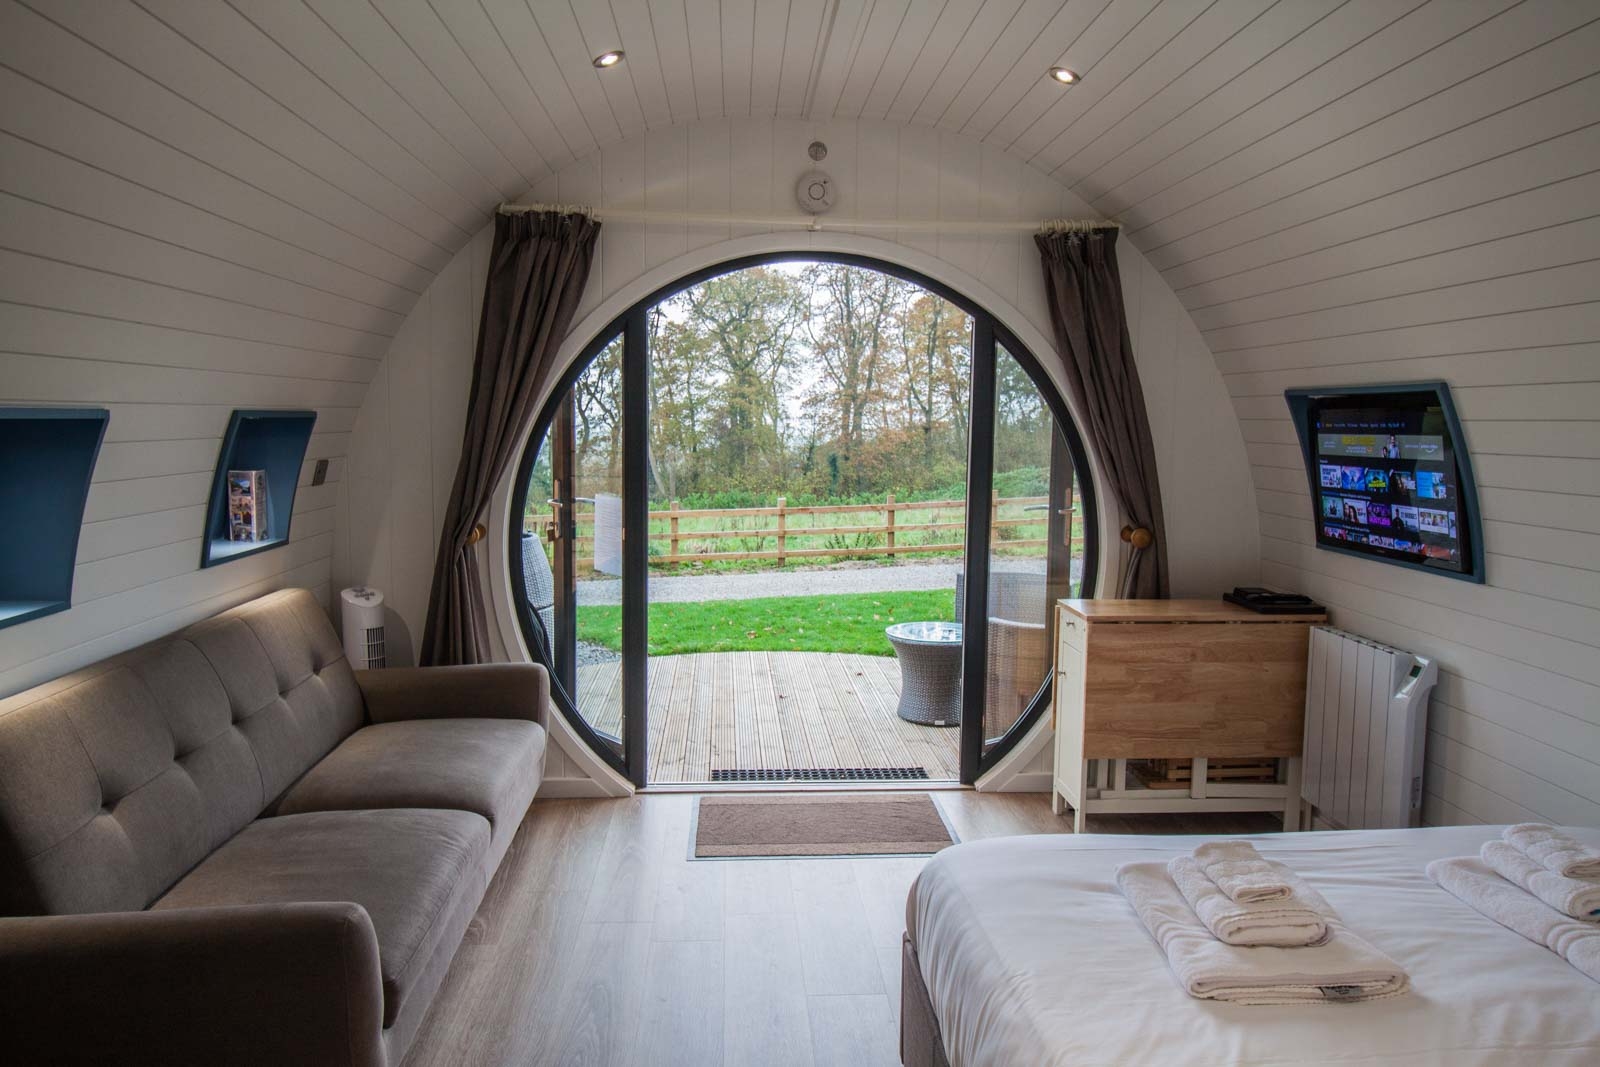 Glamping Pods - A Luxury Camping Experience in the Yarra Valley - My Poppet  Living